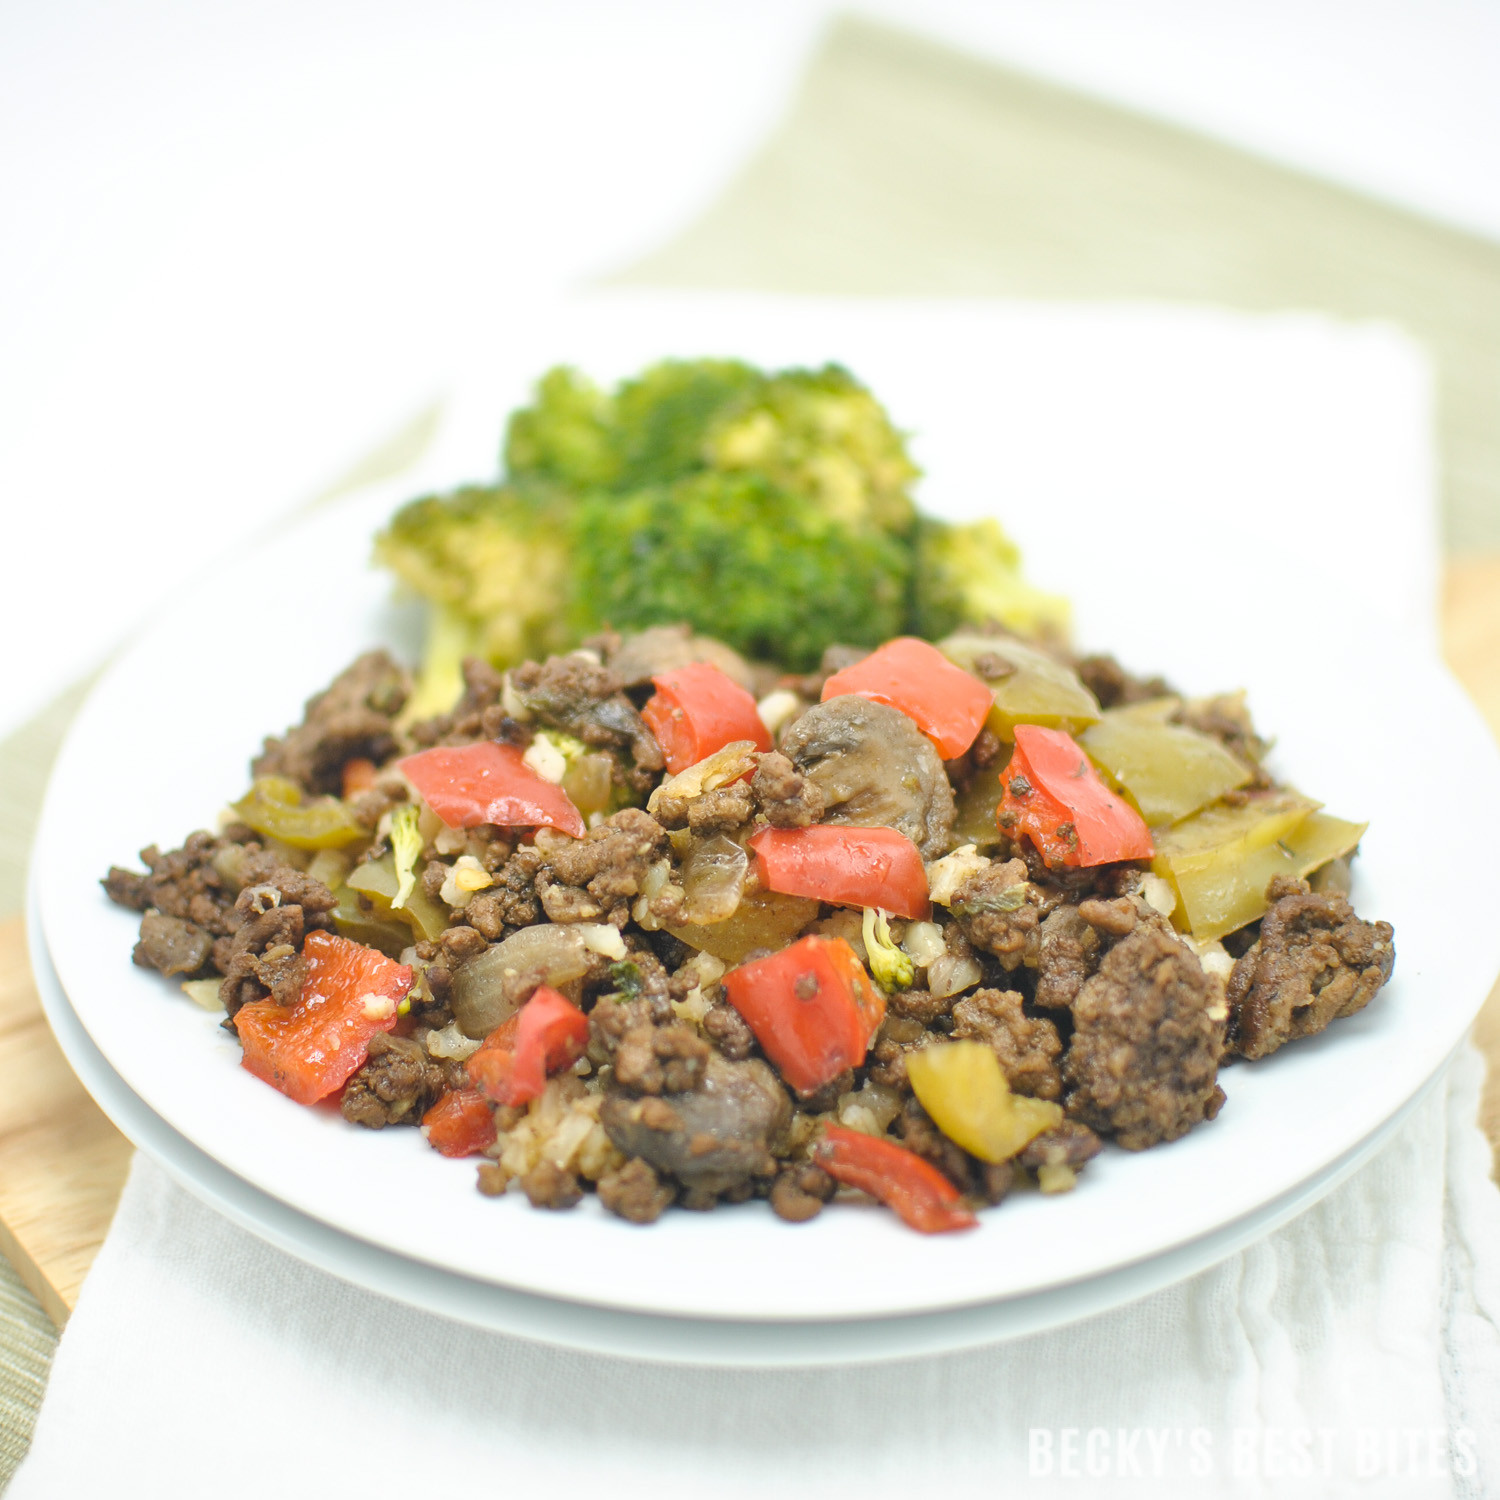 Healthy Ground Beef Skillet Recipes
 Bell Pepper Mushroom and Ground Beef Skillet Recipe Becky